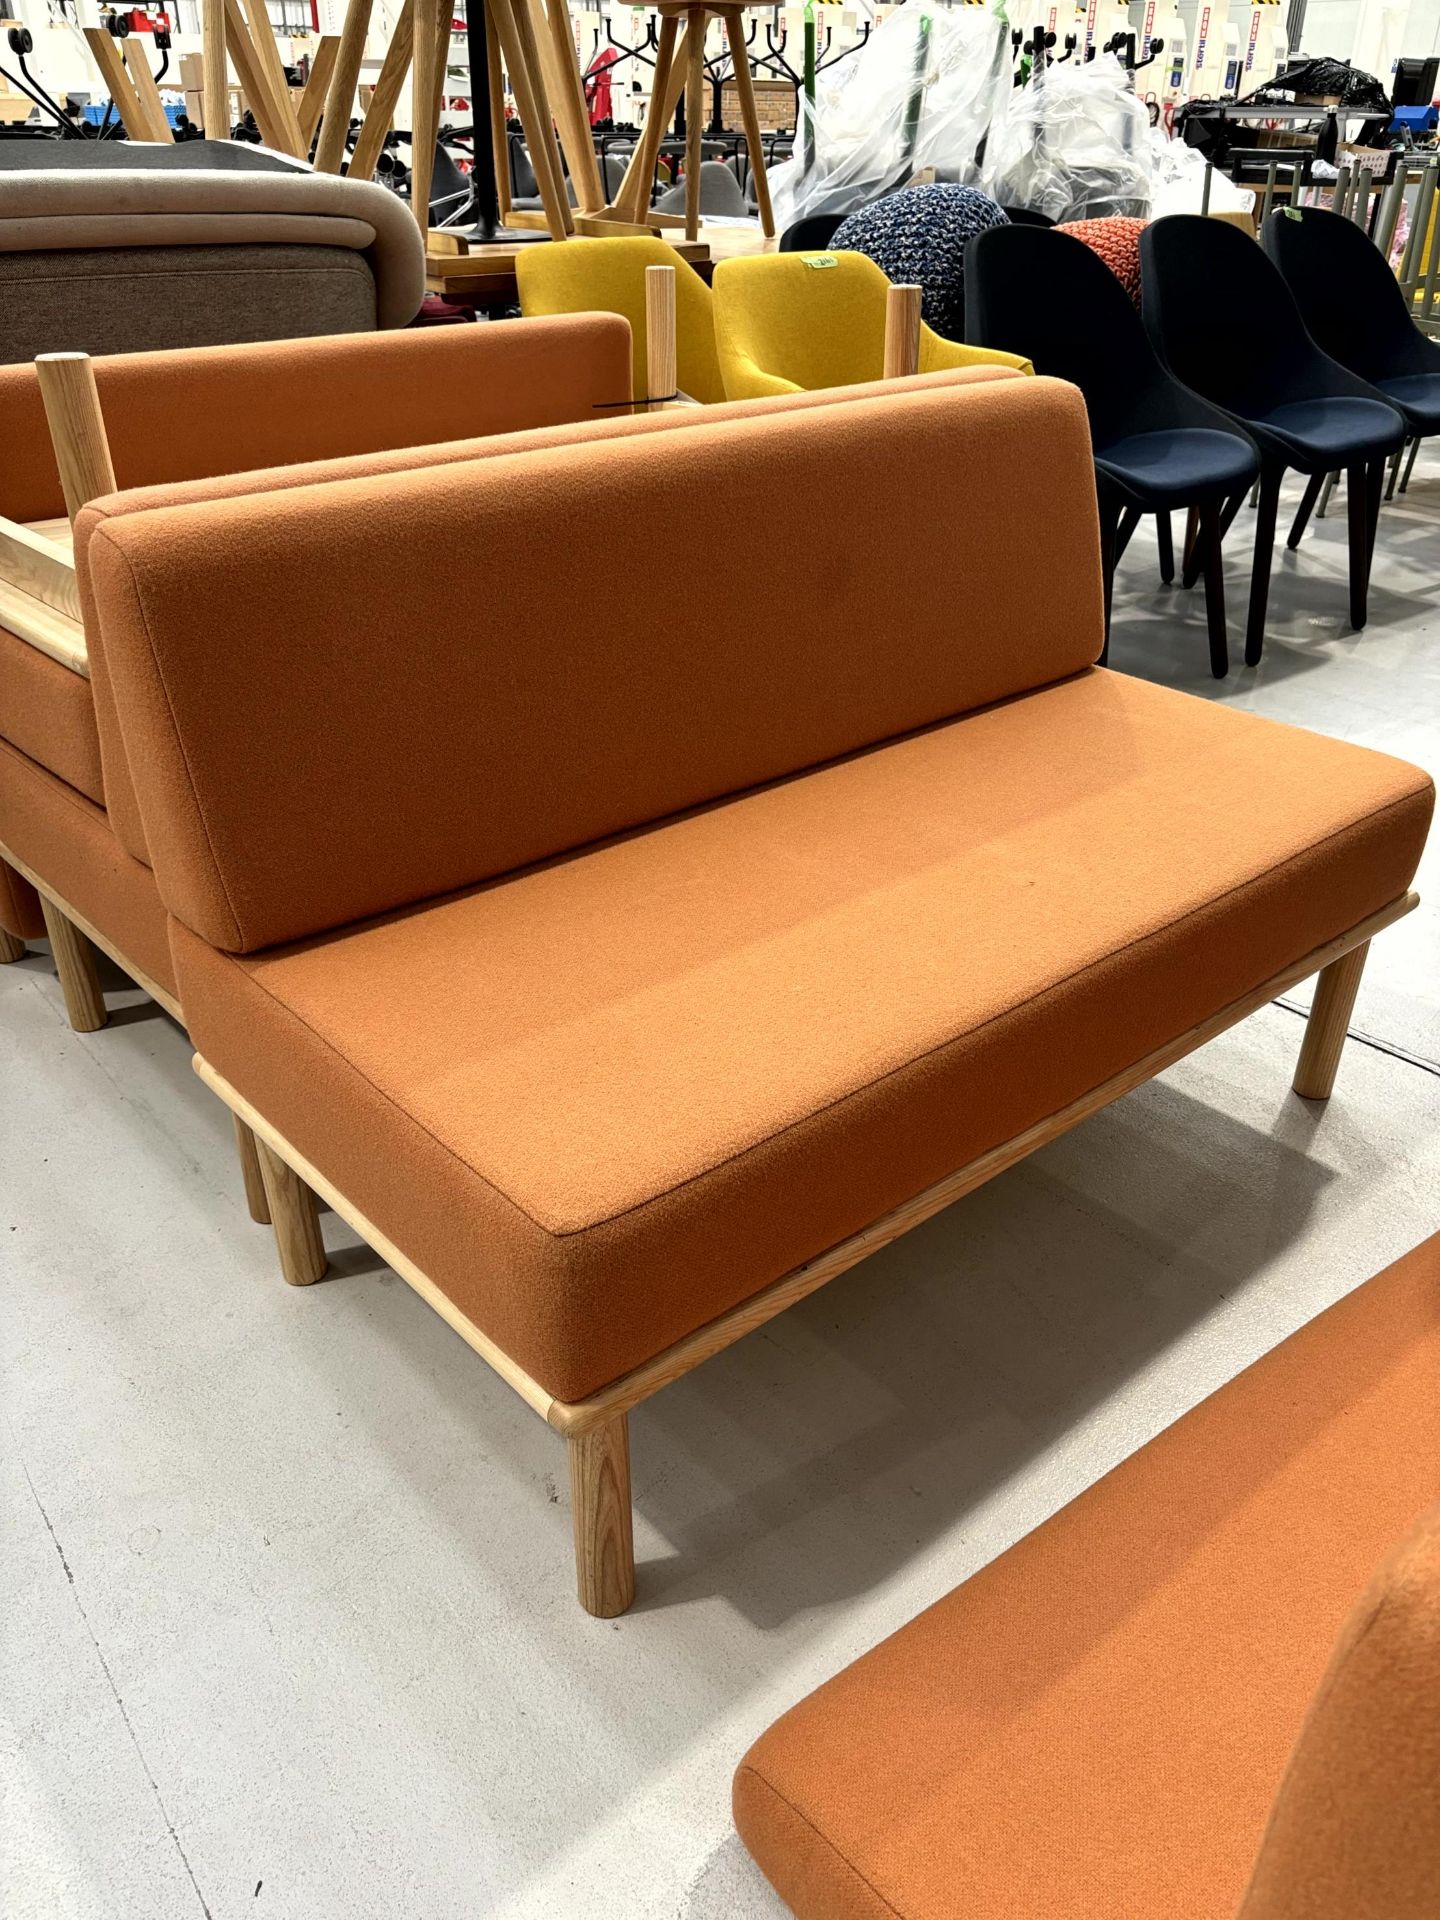 3x (no.) cloth upholstered bench seats